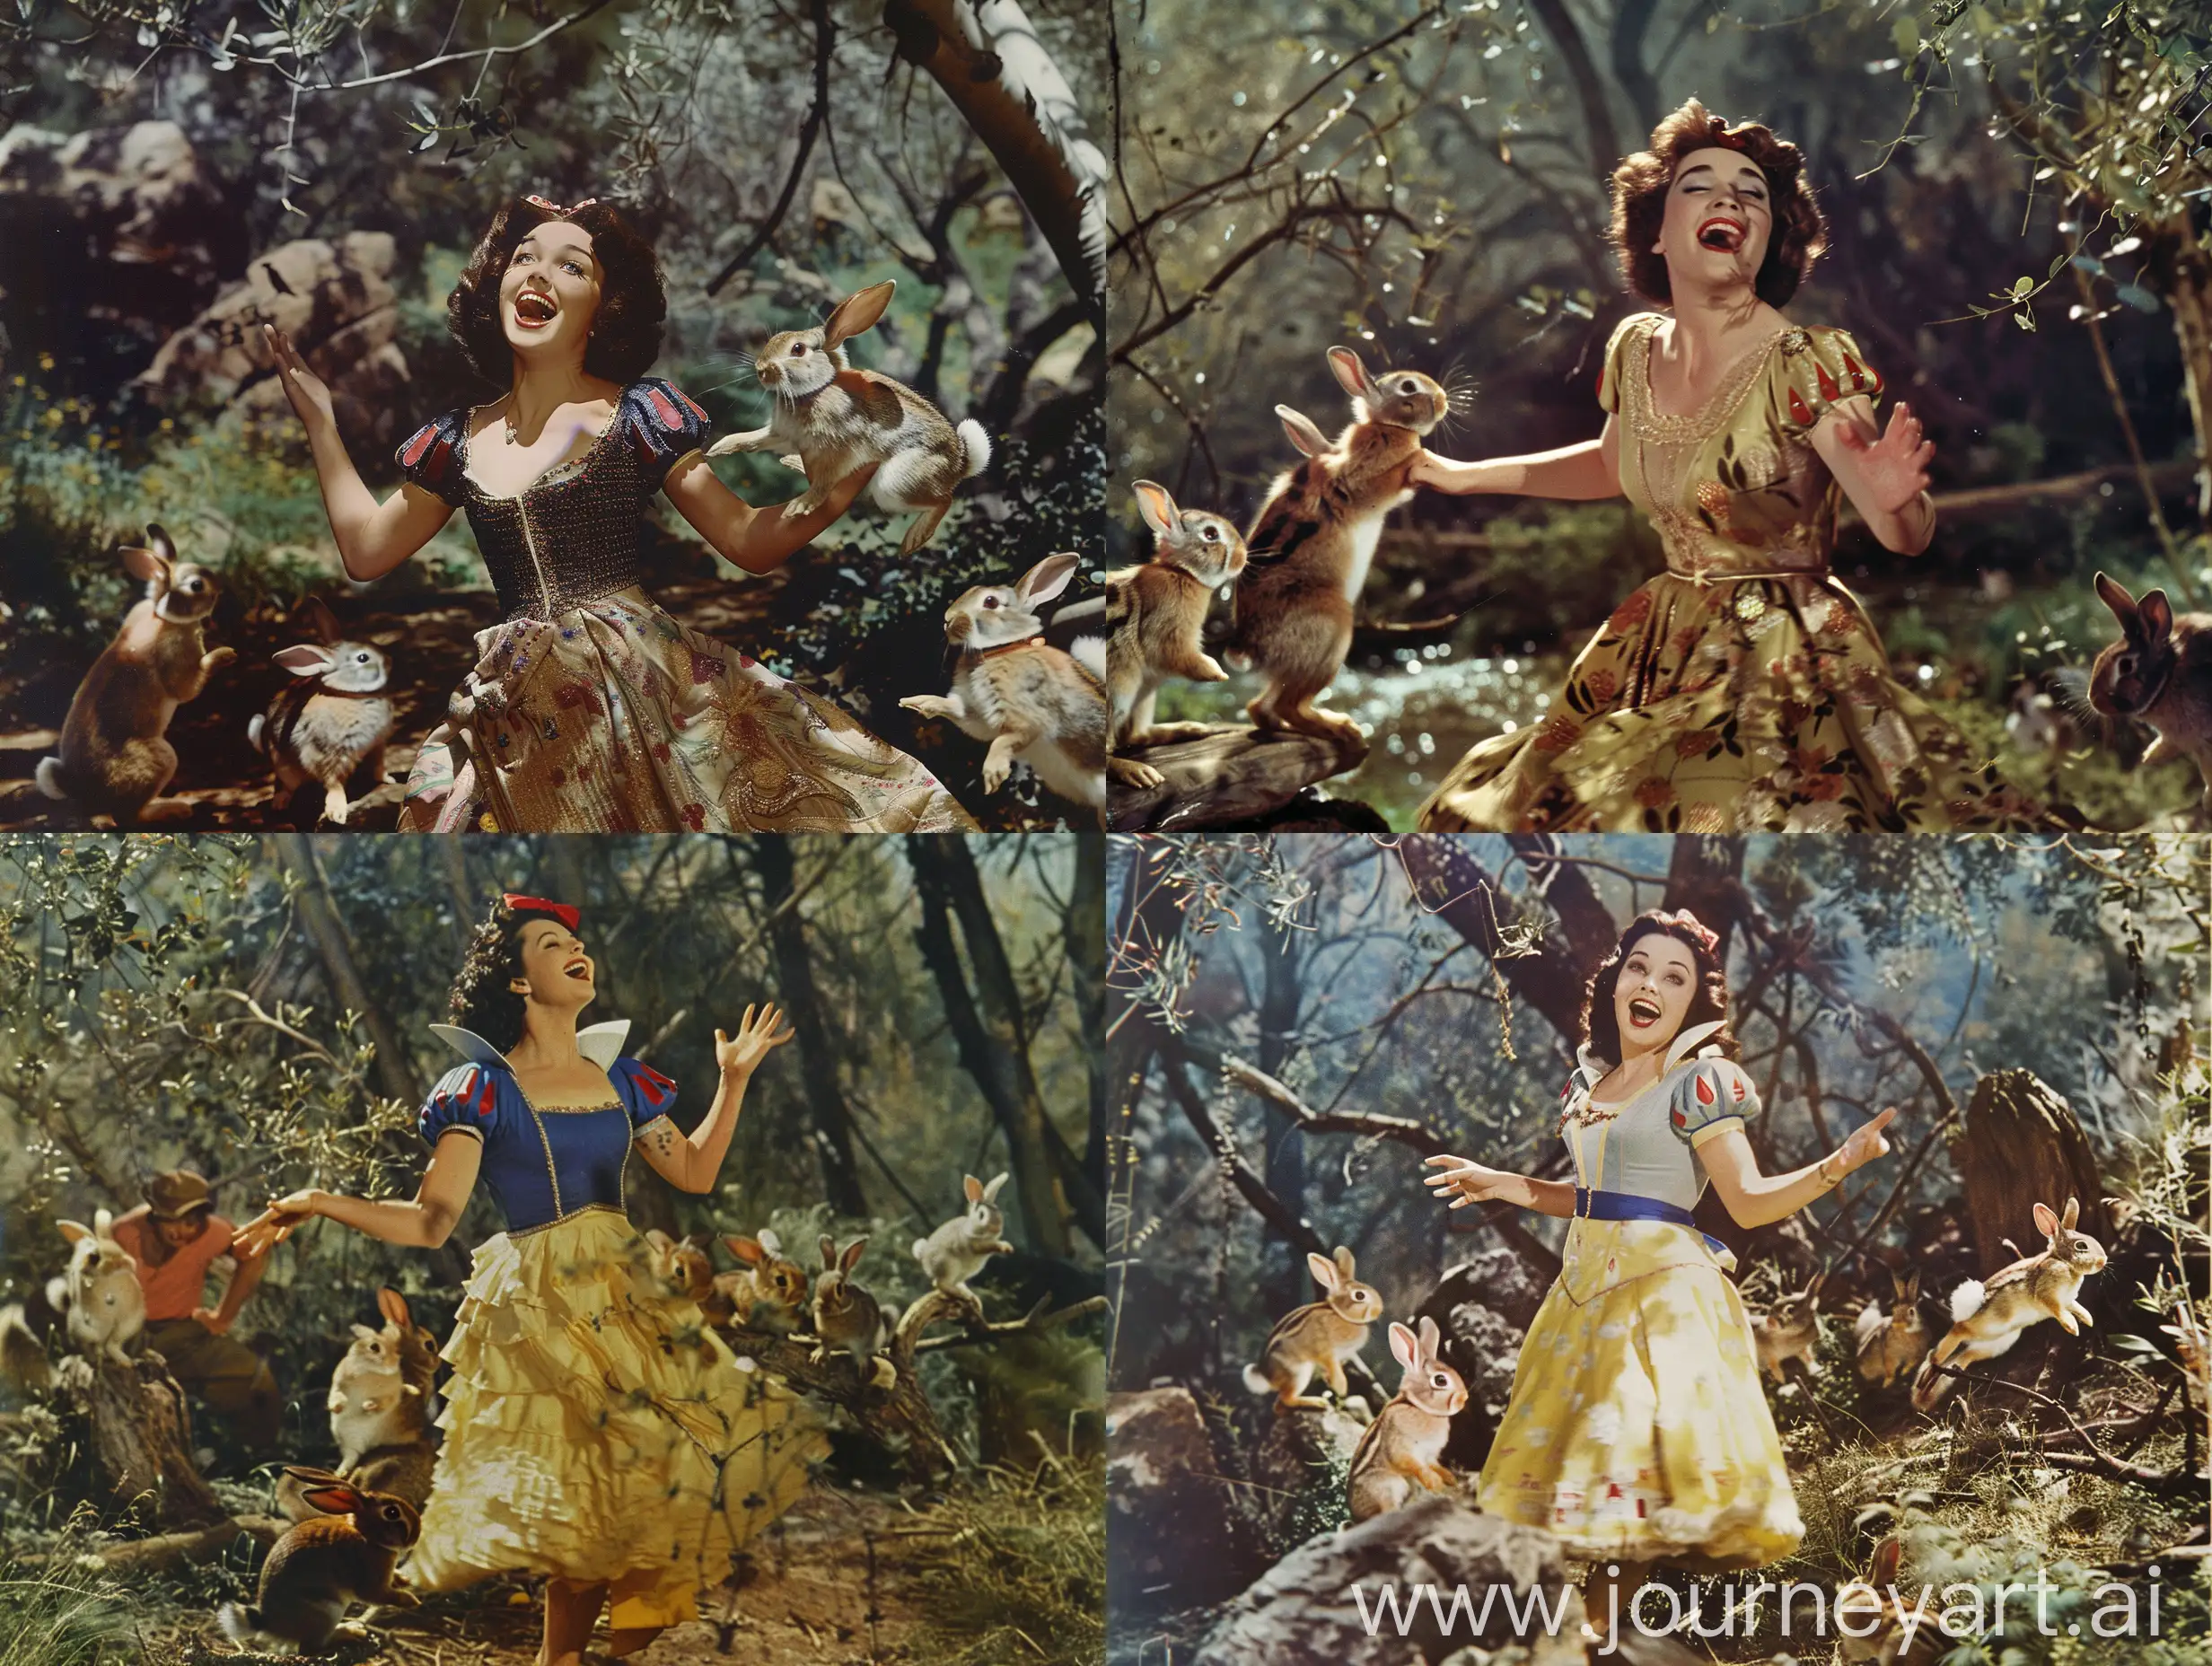 Elizabeth Taylor happy as Snow White, full body. Singing and dancing in the forest, rabbits and chipmunks running happily around her. 1950s Super Panavision 70, color picture, vintage quality